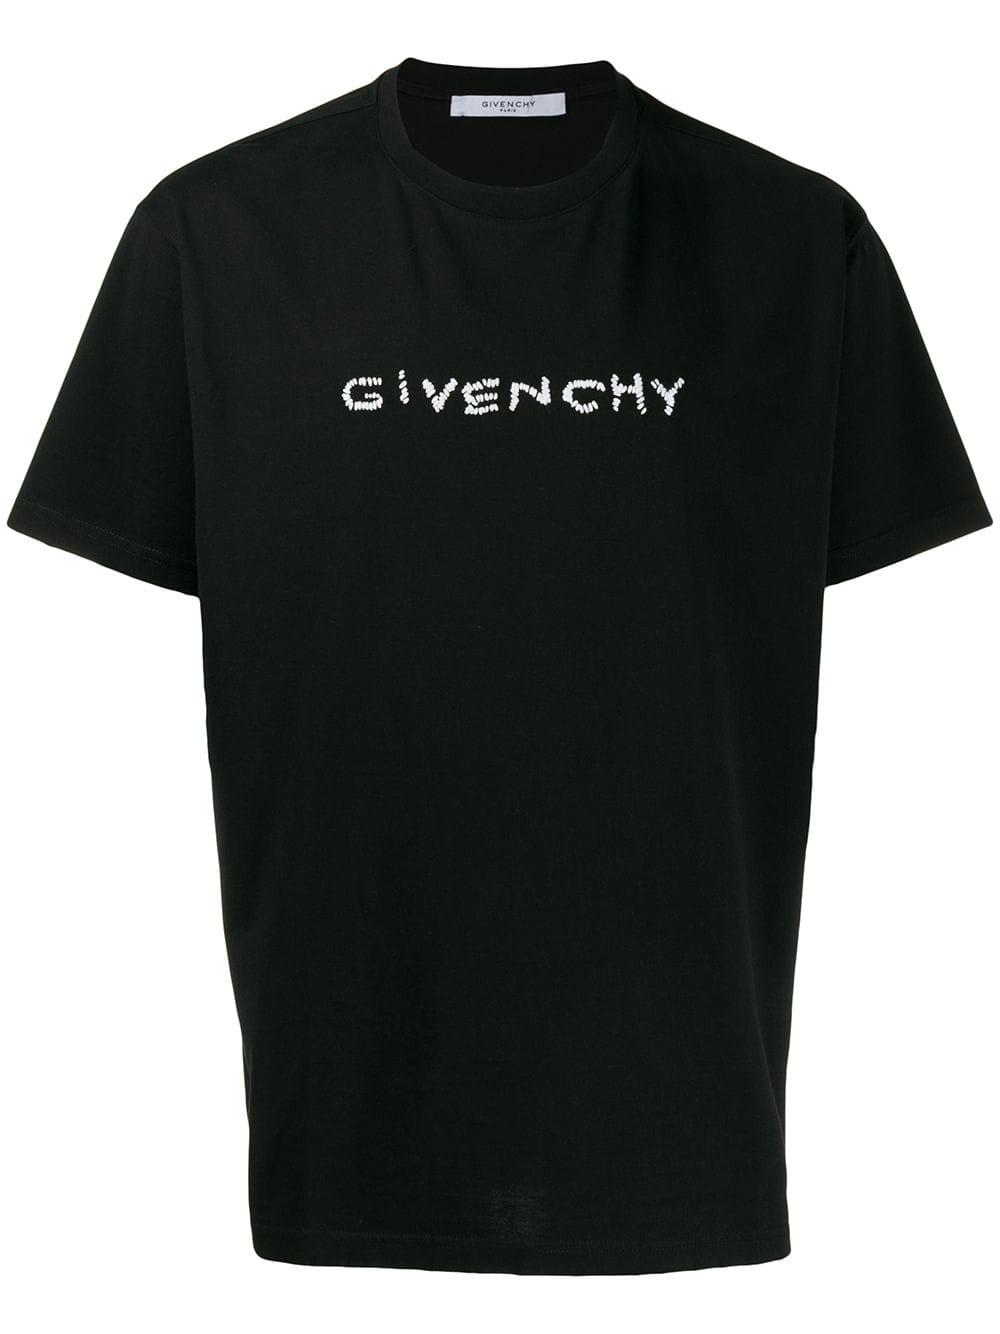 Givenchy Imperfect Embroidered Logo T-shirt in Black for Men - Lyst